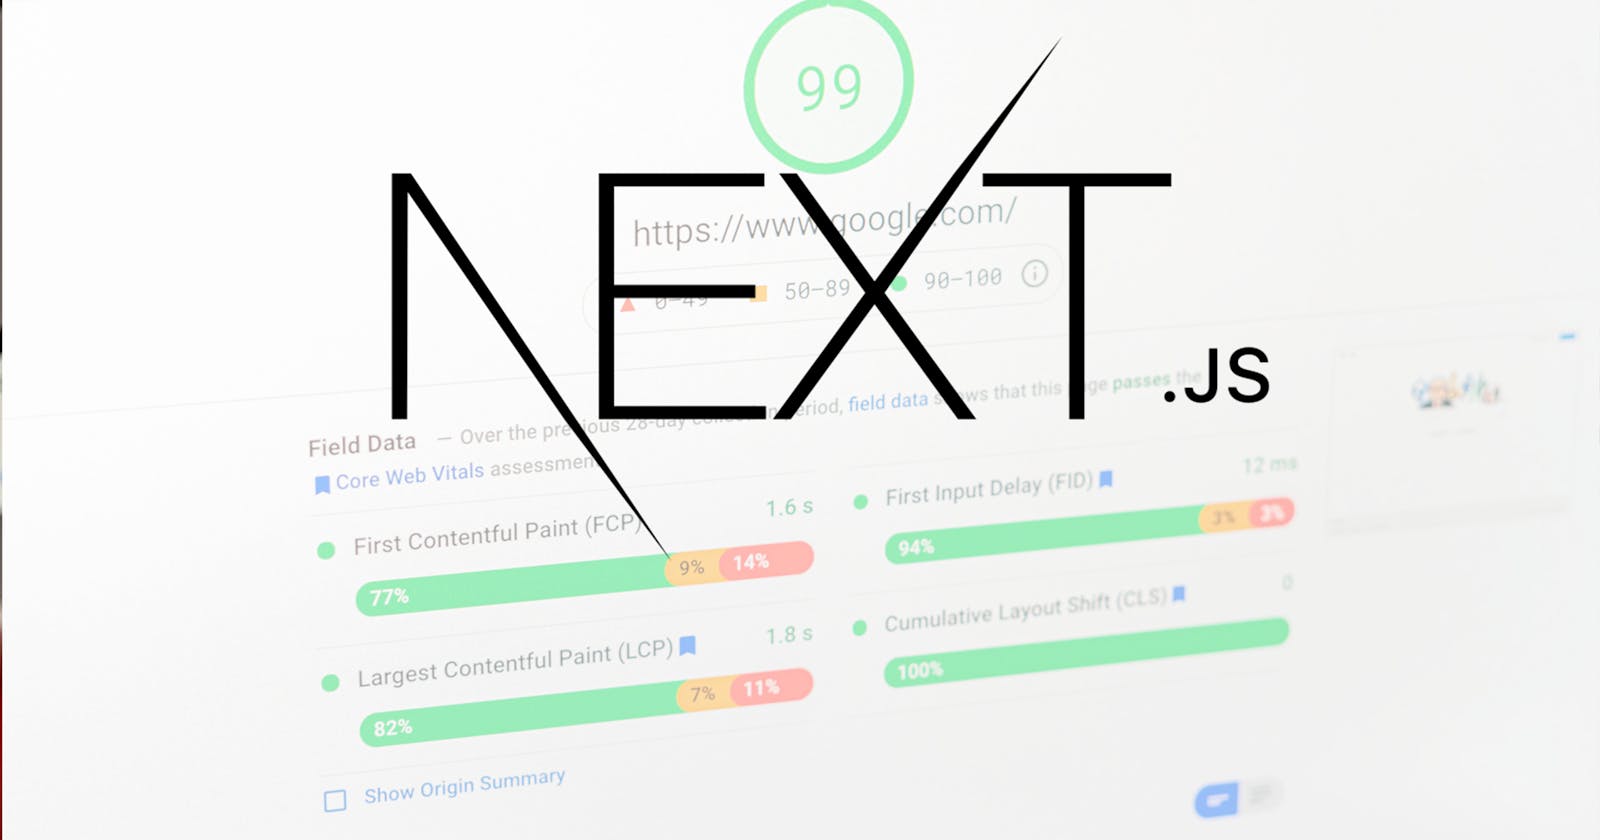 NextJs SEO Checklist: The Ultimate Roadmap To A Fast, SEO-ready Website